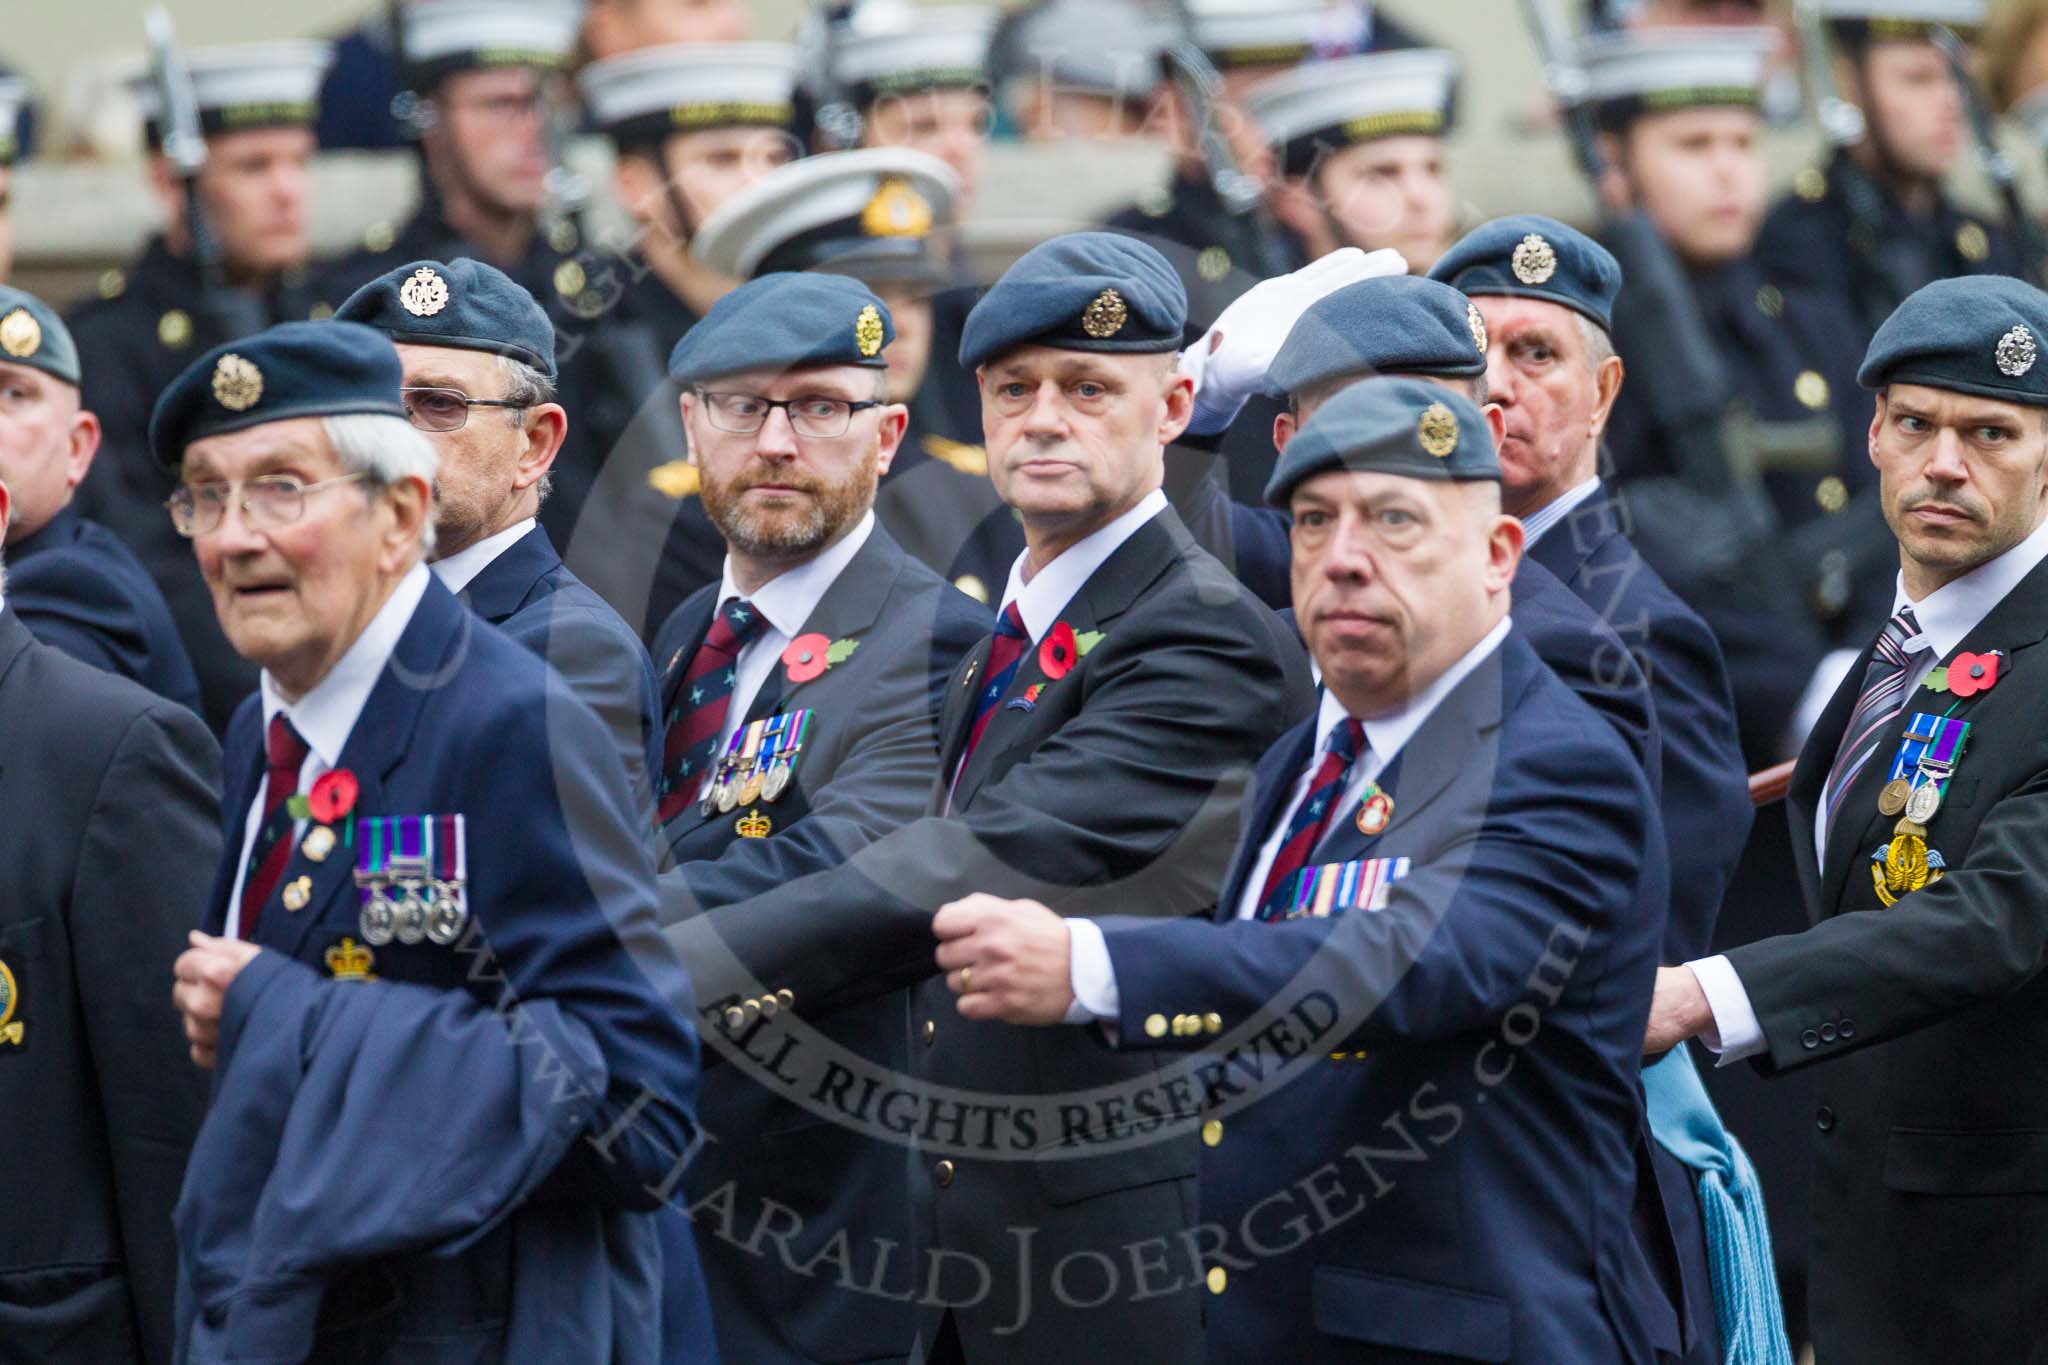 Remembrance Sunday at the Cenotaph 2015: C2, Royal Air Force Regiment Association.
Cenotaph, Whitehall, London SW1,
London,
Greater London,
United Kingdom,
on 08 November 2015 at 11:47, image #423